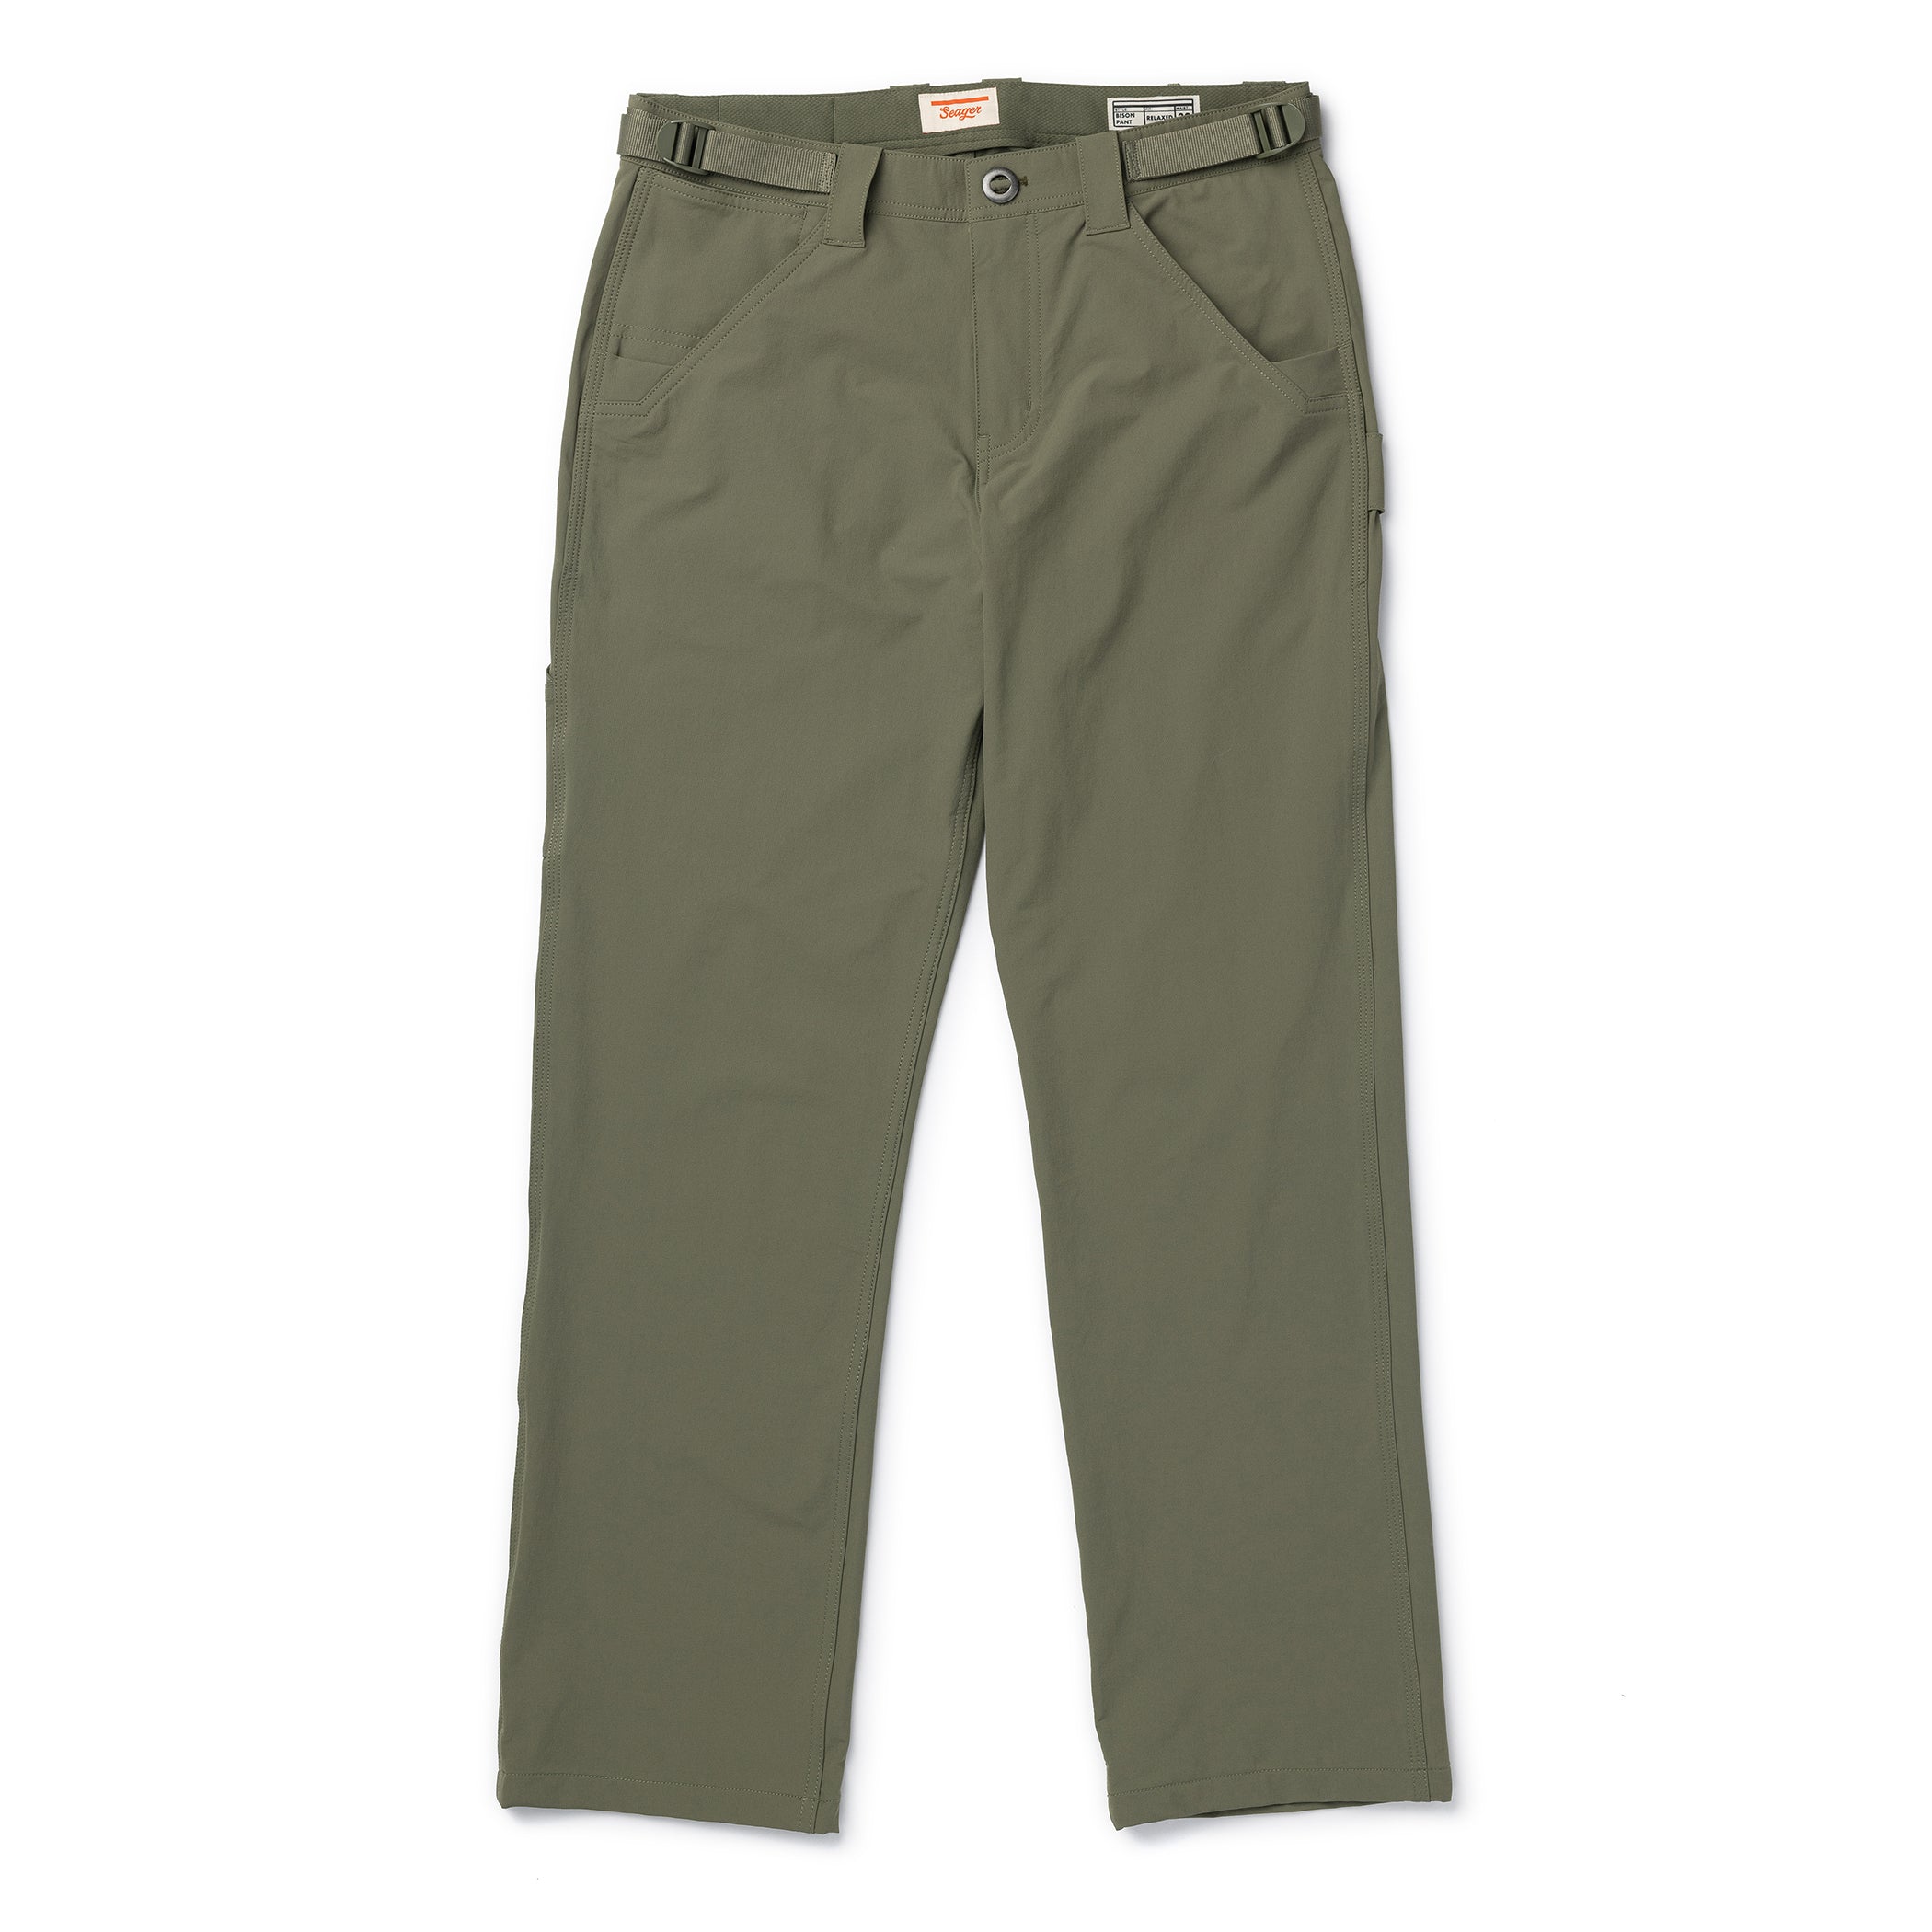 Buy Devil Men's Cotton Relaxed Fit Zipper Dori Green Slim fit Cargo Jogger  Pants Size 34 at Amazon.in